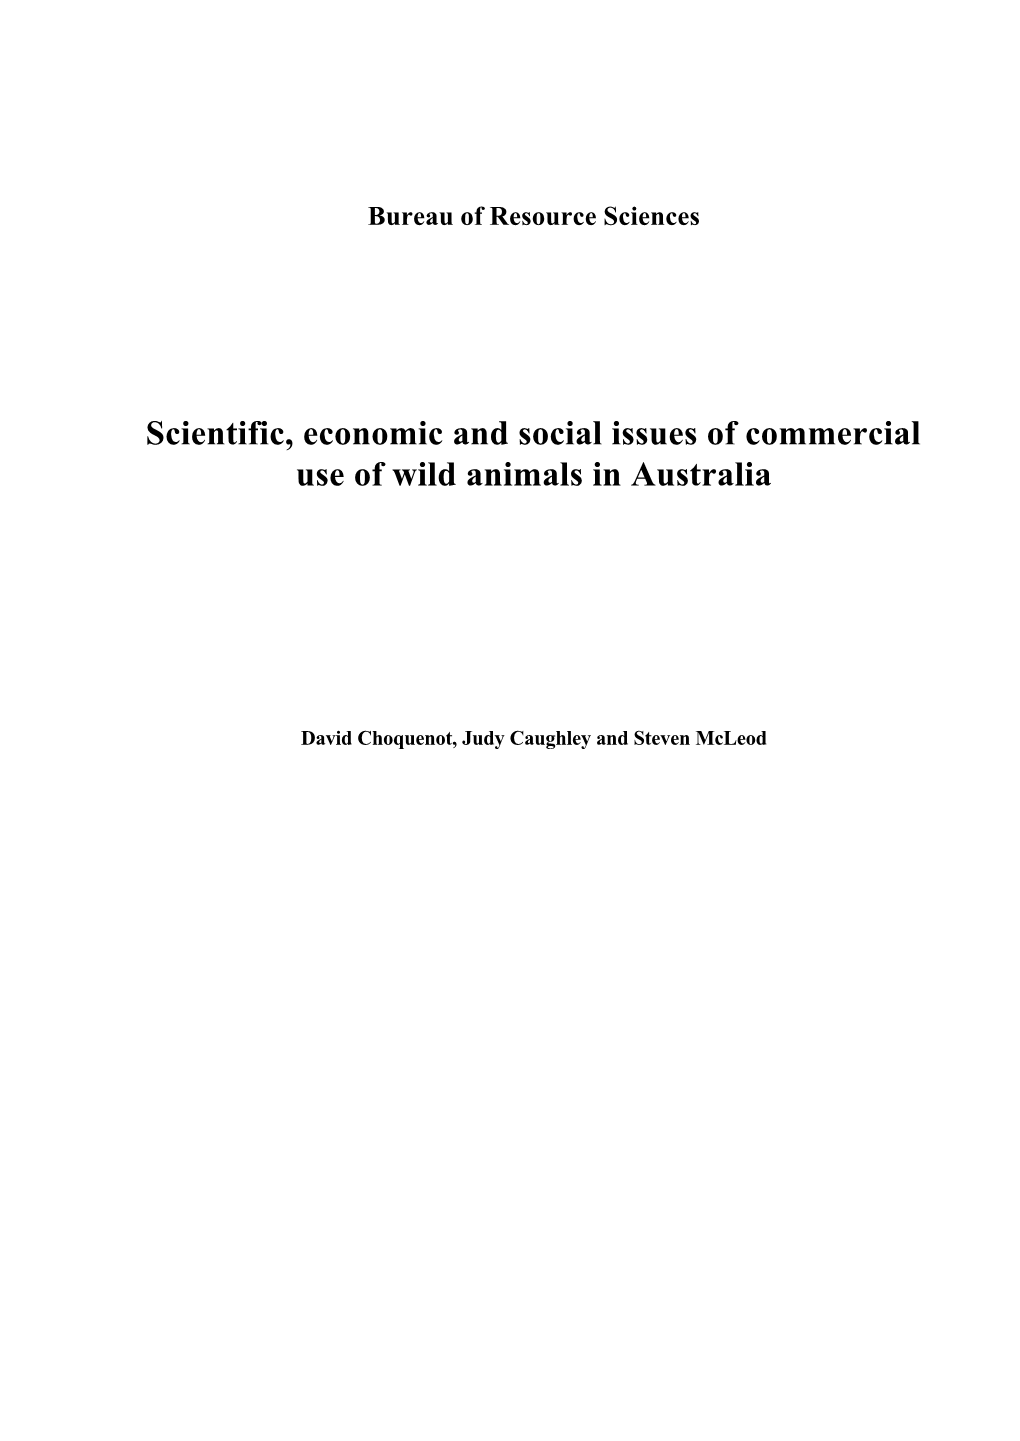 Scientific, Economic and Social Issues of Commercial Use of Wild Animals in Australia